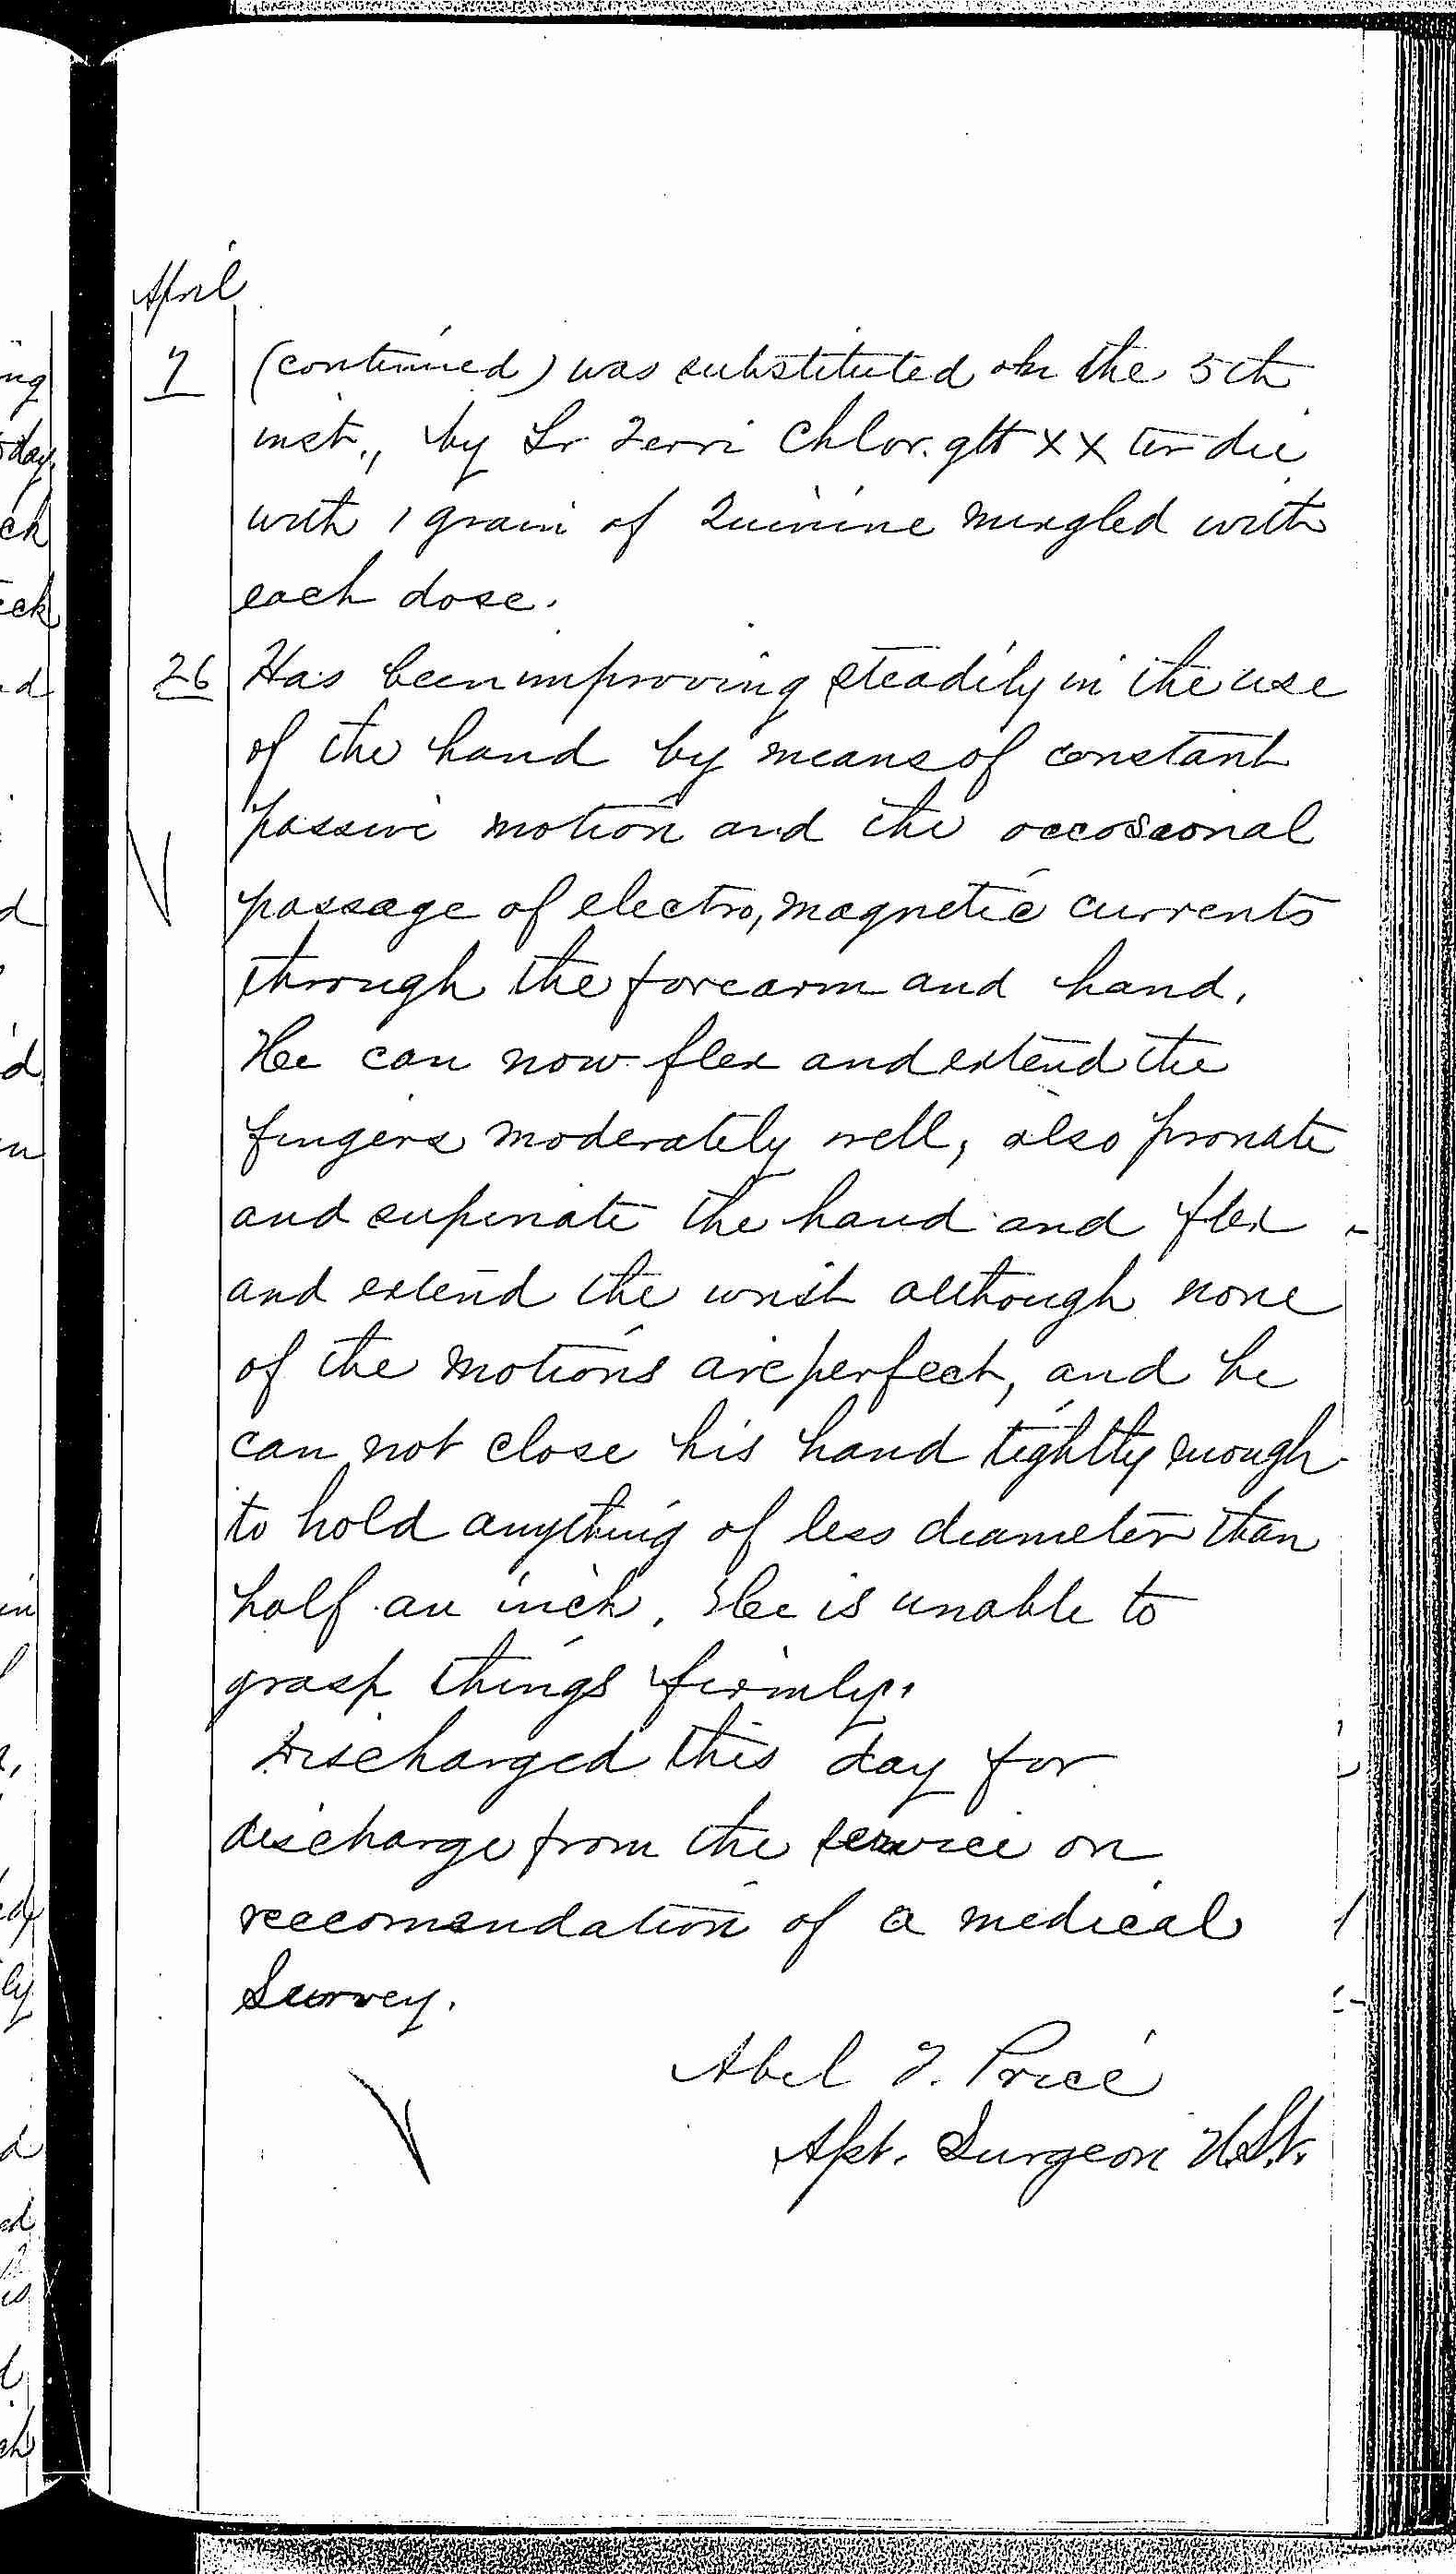 Entry for James Lockrey (page 5 of 5) in the log Hospital Tickets and Case Papers - Naval Hospital - Washington, D.C. - 1868-69